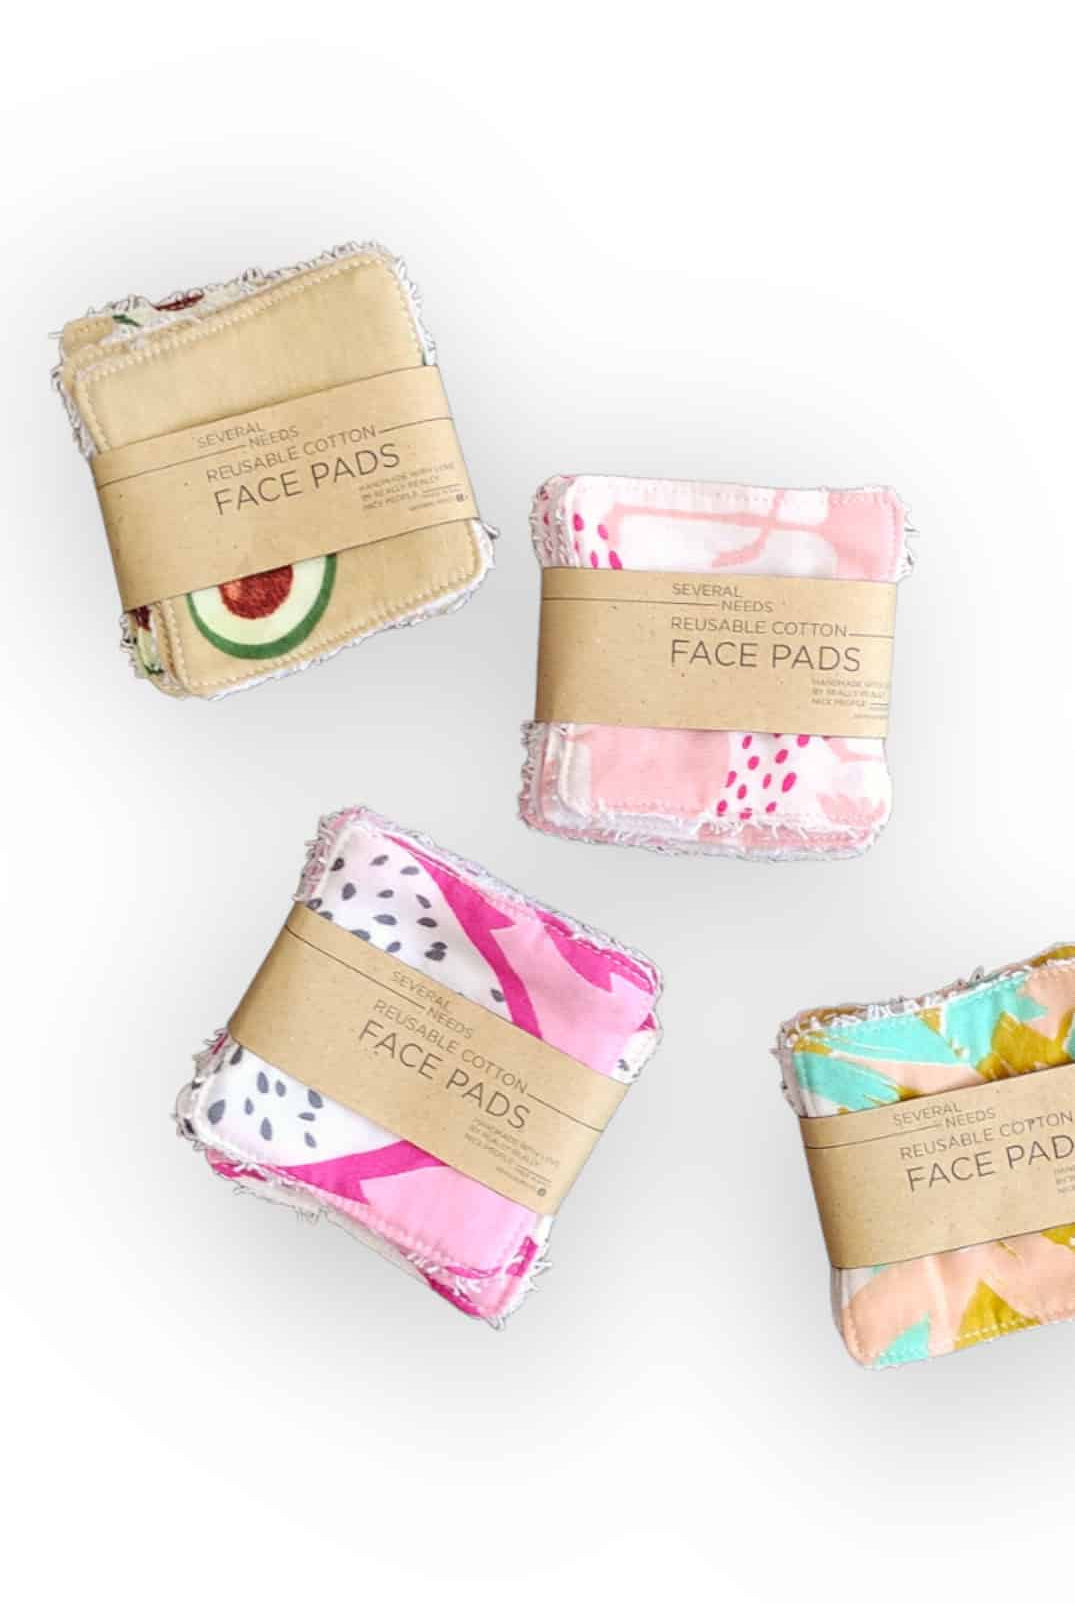 Cleansing Face pads